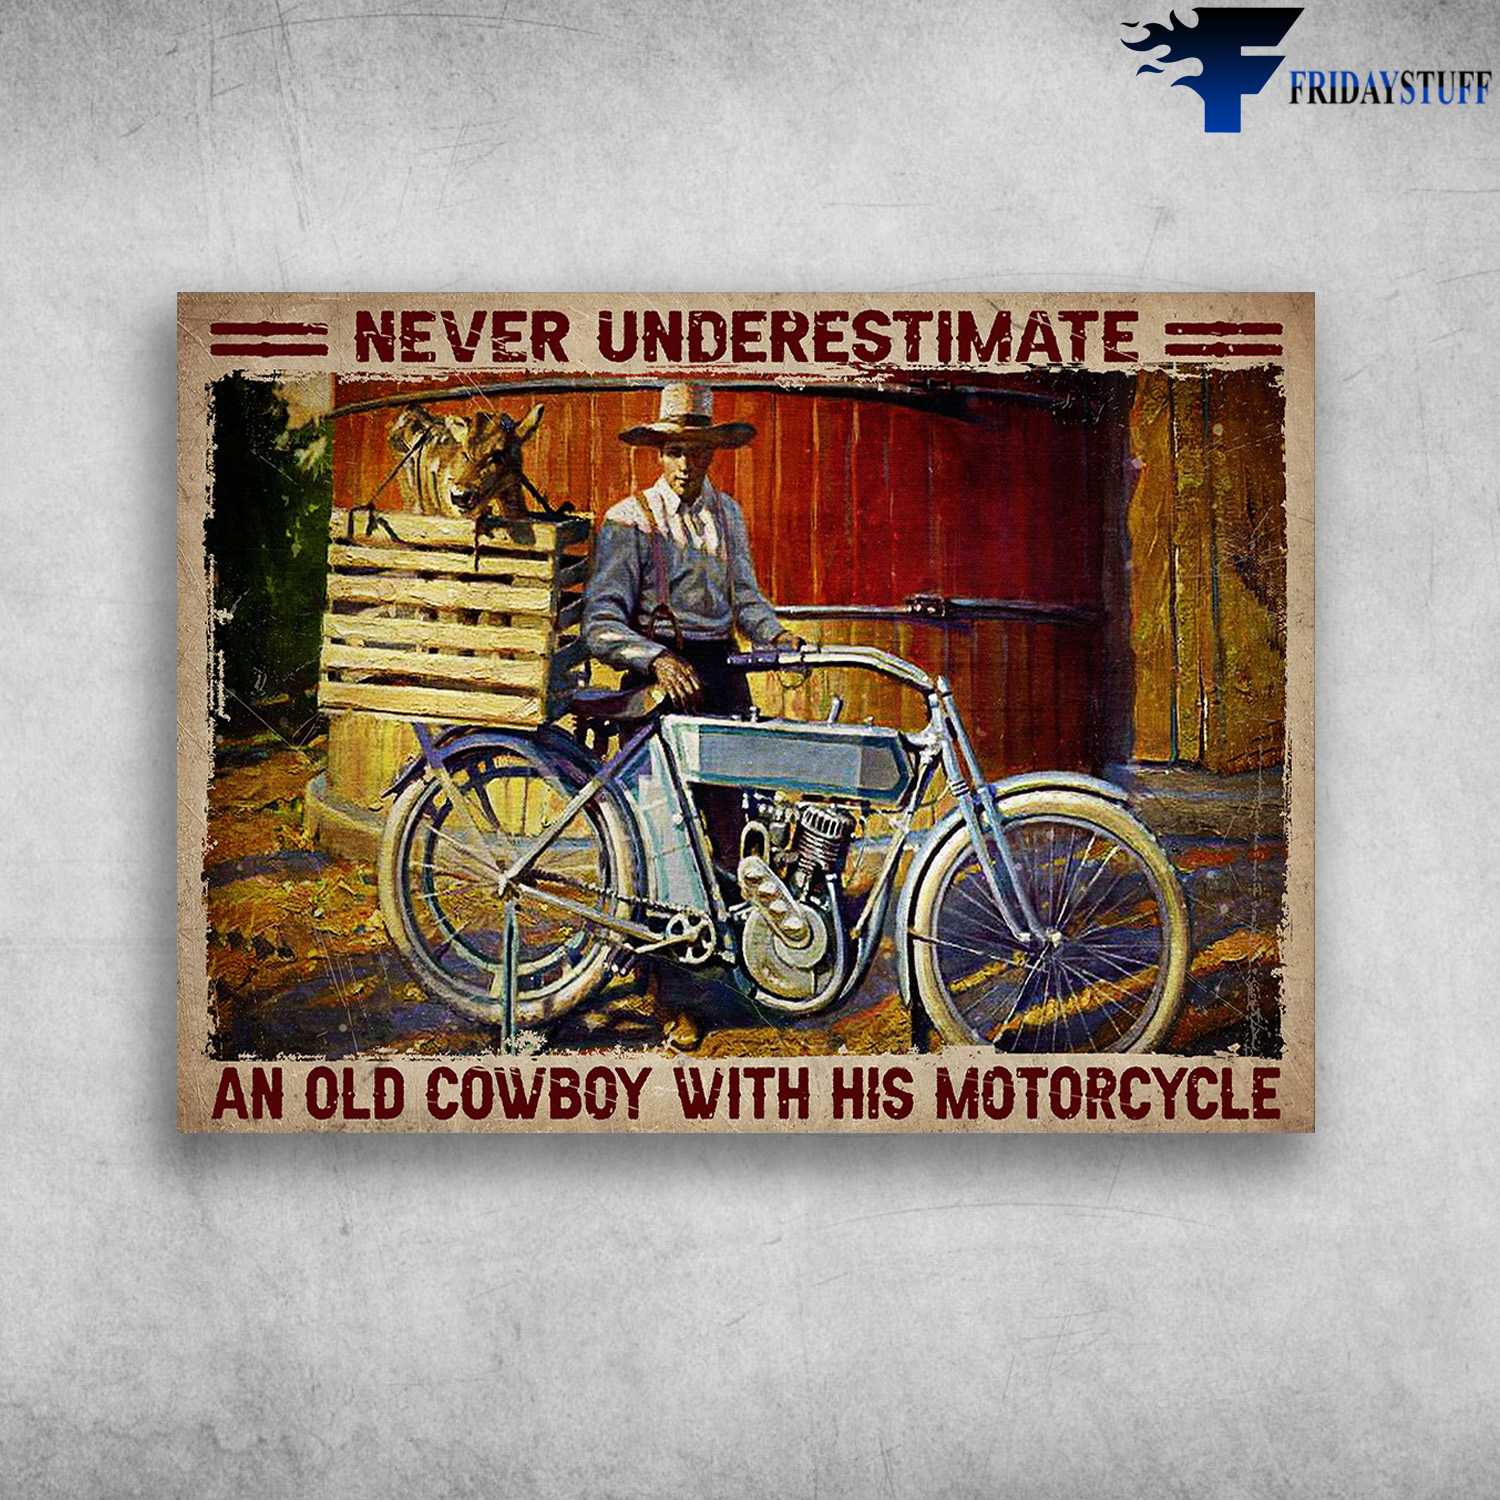 Cowboy Motorcycle - Never Underestimate An Old Cowboy, With His Motorcycle